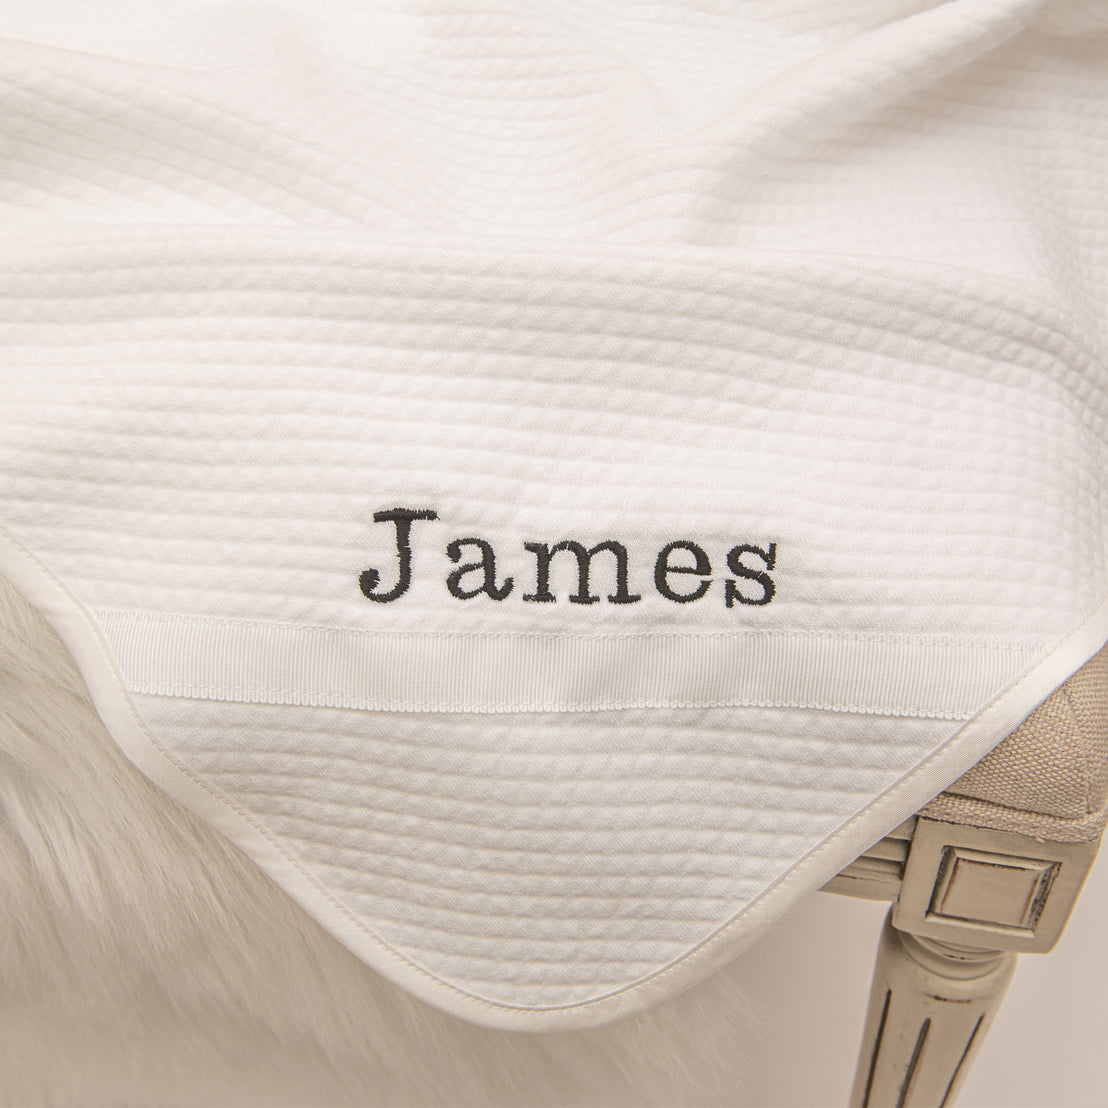 Flat lay photo of the James Personalized Blanket. It is made from 100% white textured cotton with white grosgrain ribbon, silk ribbon, and the name "James" embroidered on the corner.